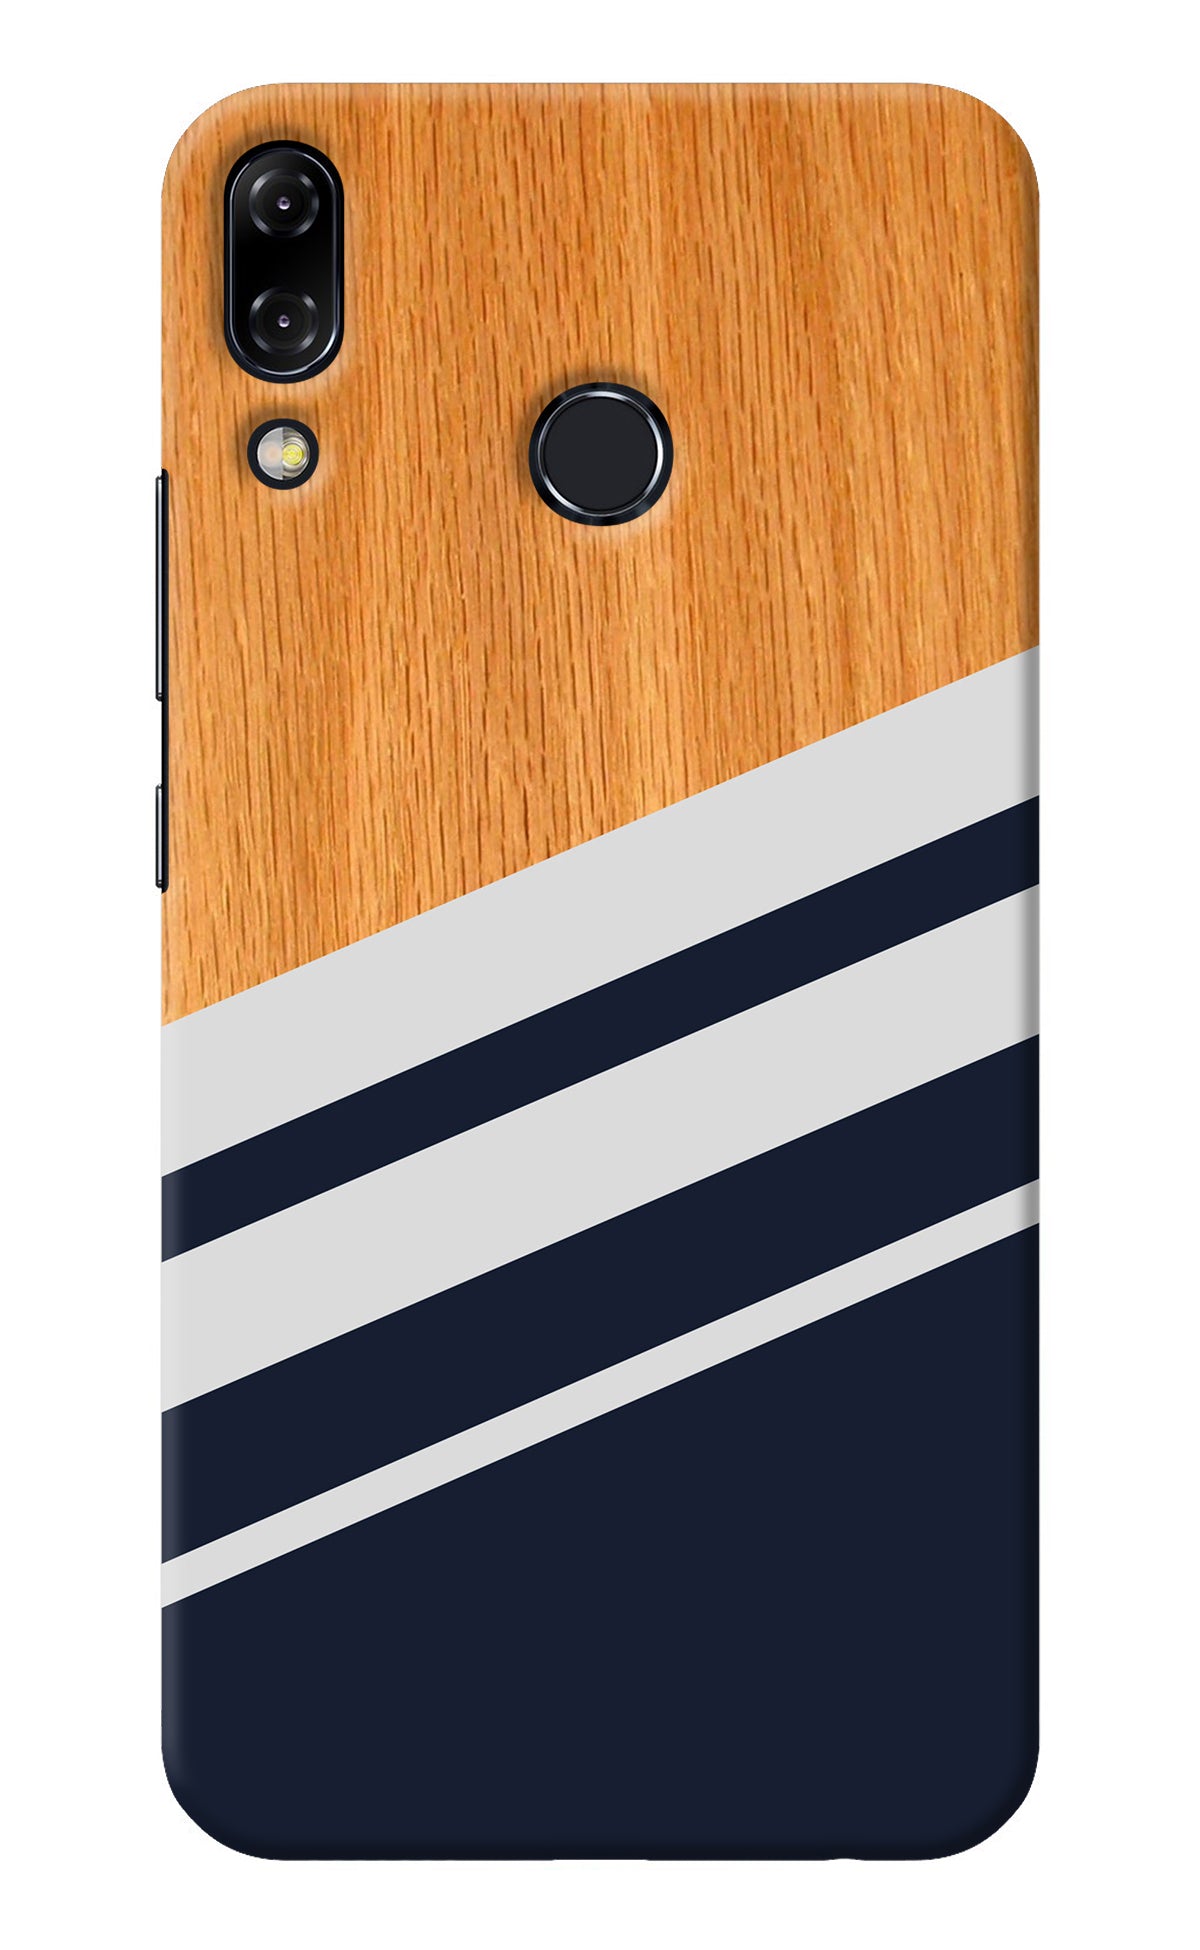 Blue and white wooden Asus Zenfone 5Z Back Cover